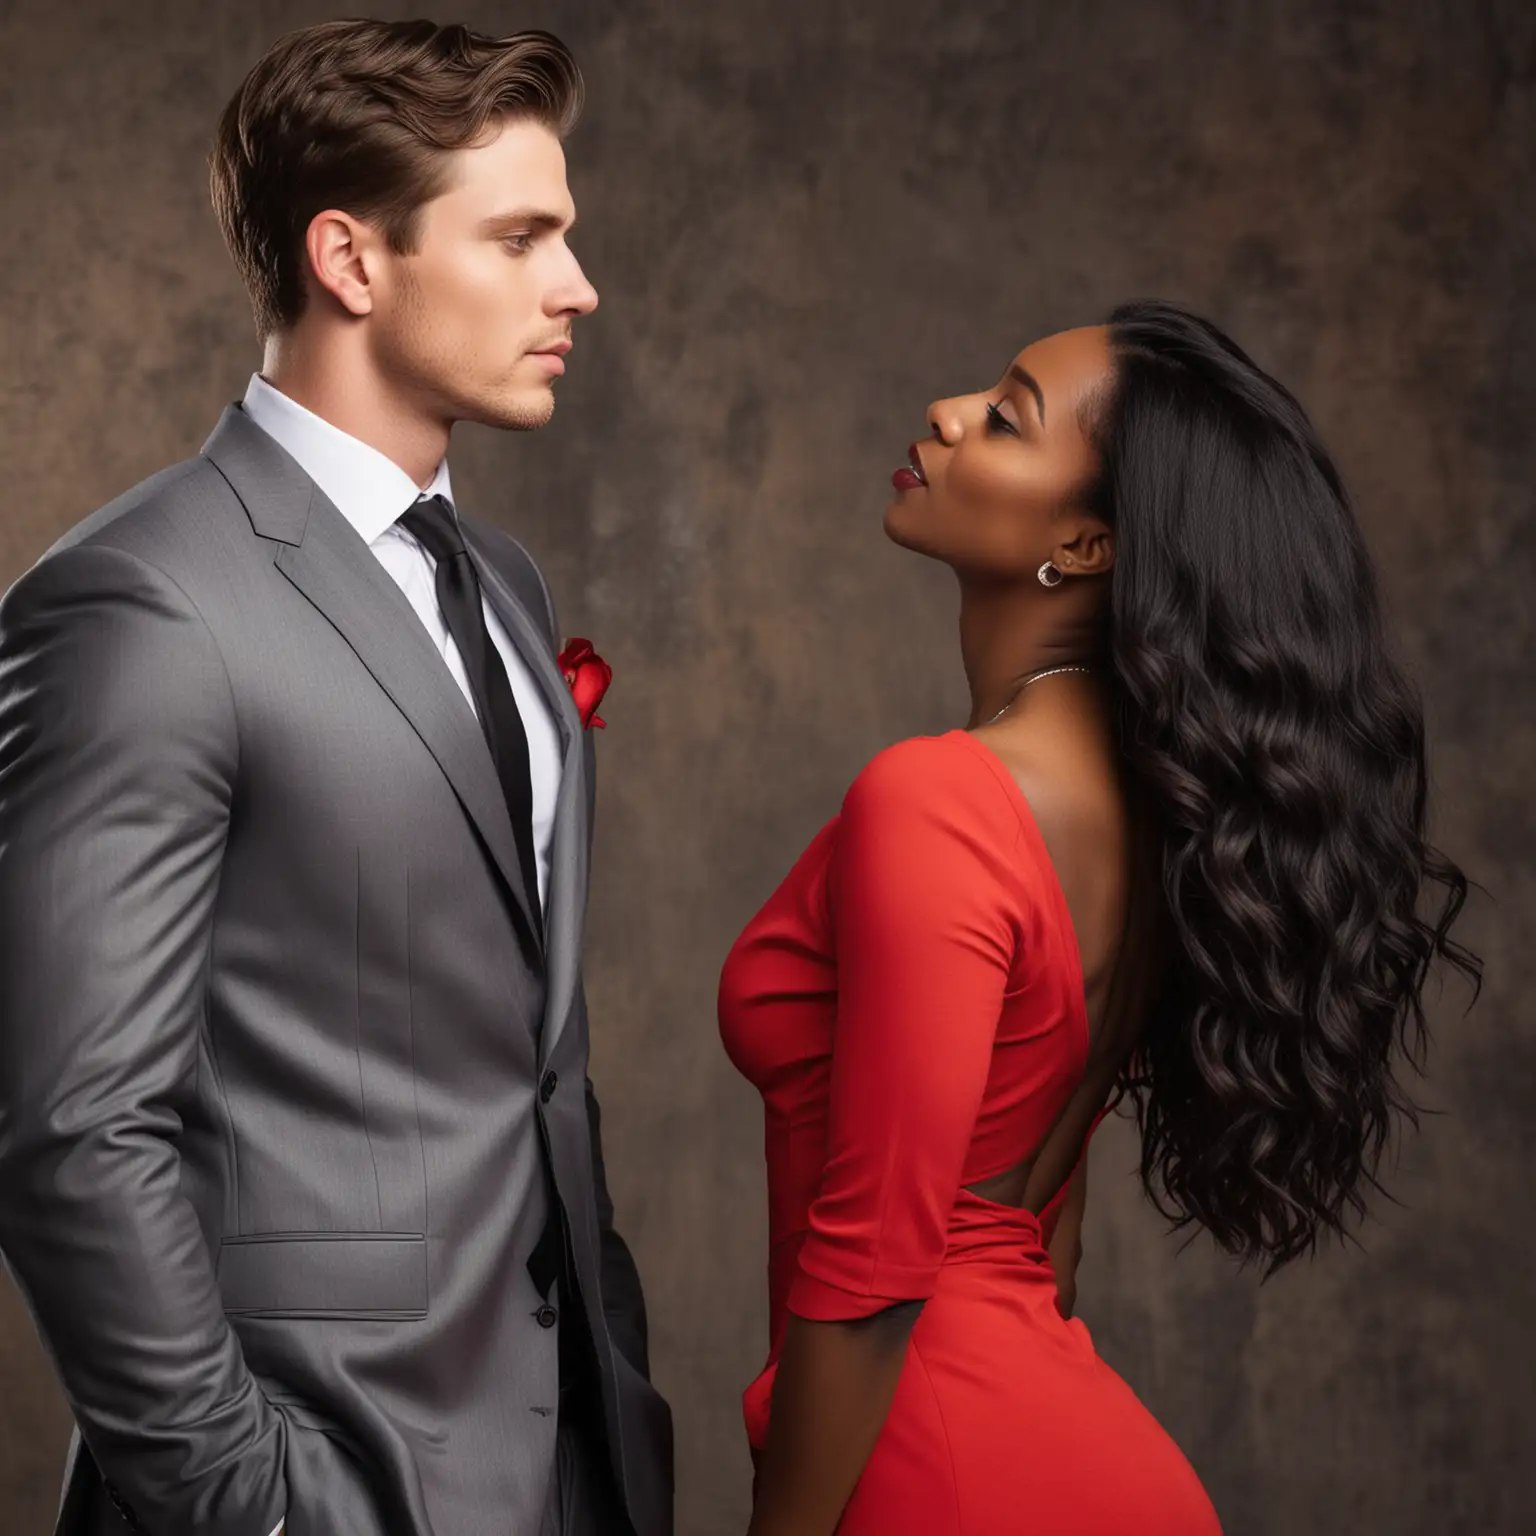 Elegant Interracial Romance White Male in Suit and Black Woman in Red Dress